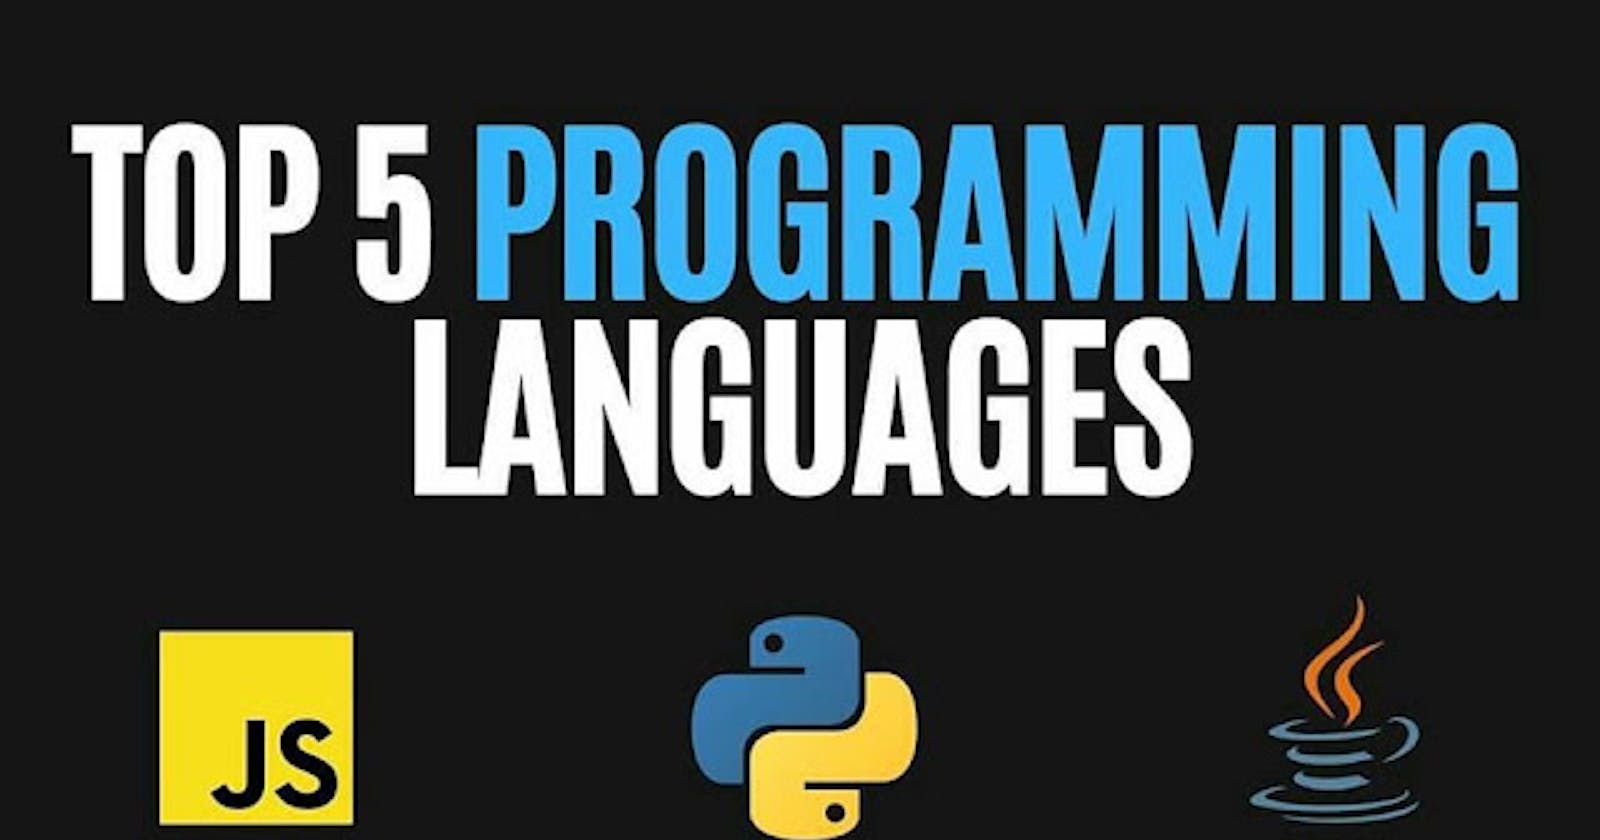 The Top 5 Programming Languages: How to Choose Your First Among Them as a Beginner